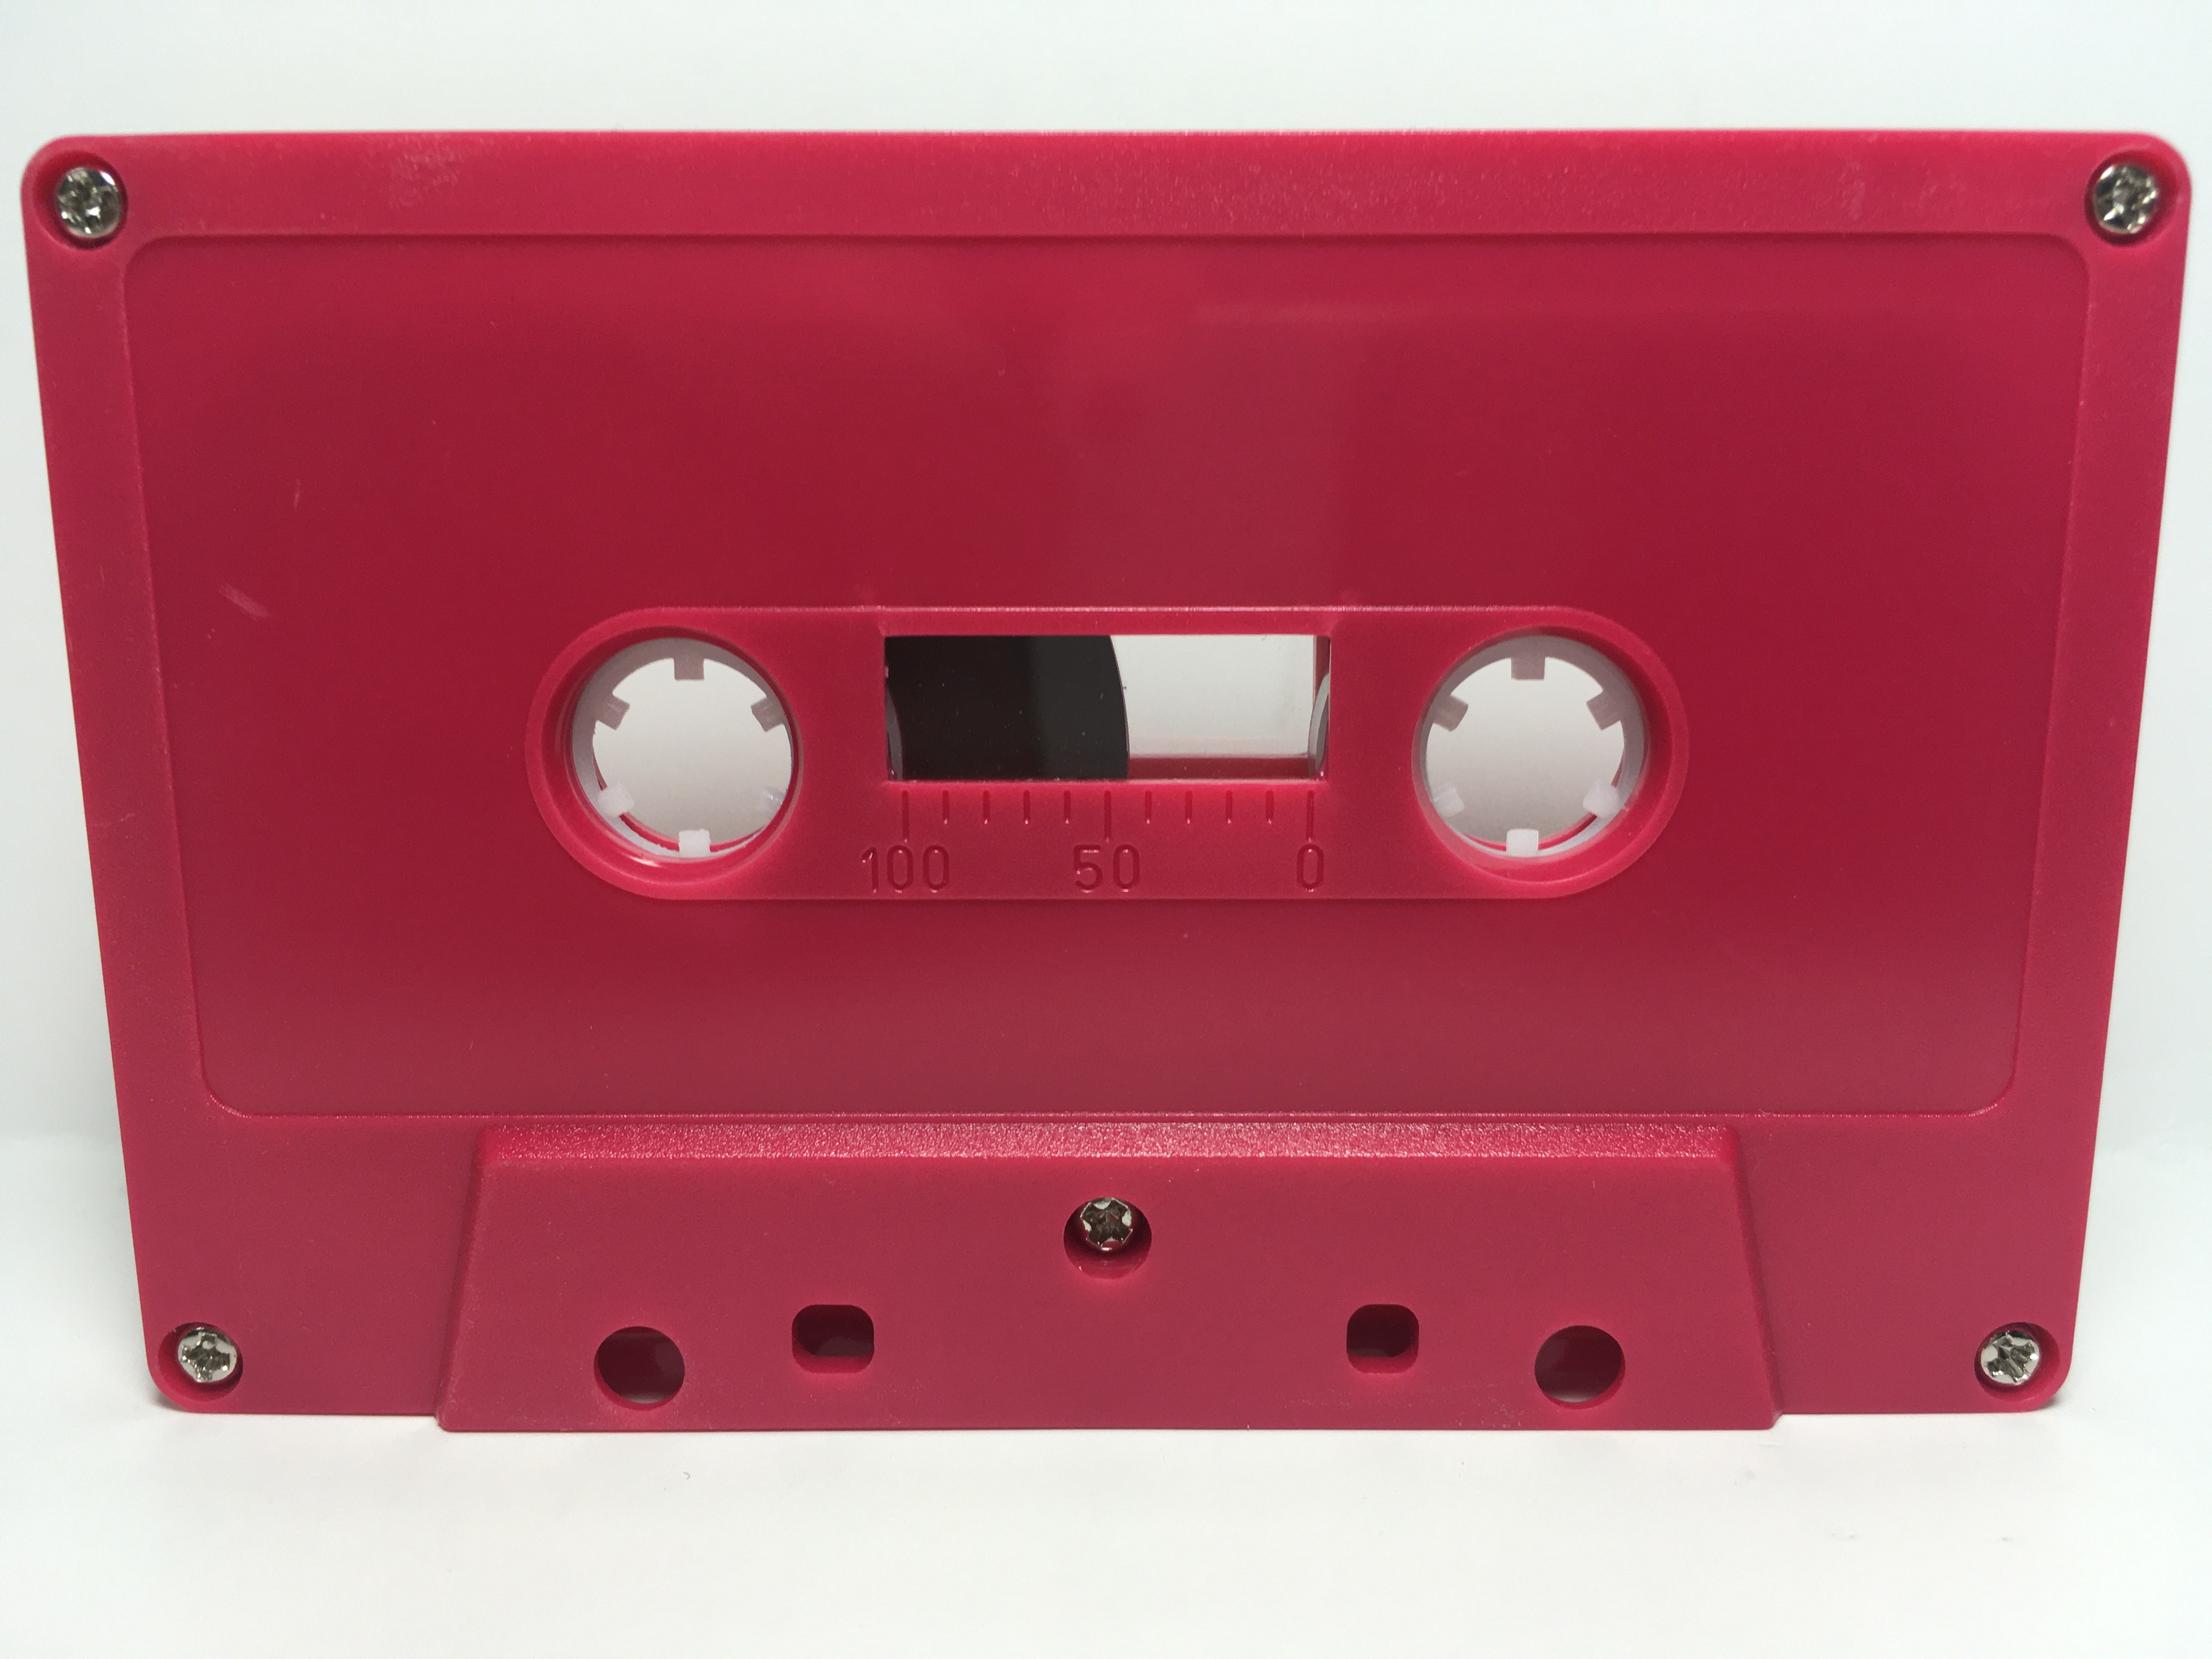 C-27 Normal Bias Rubine Red Cassettes 25 Pack